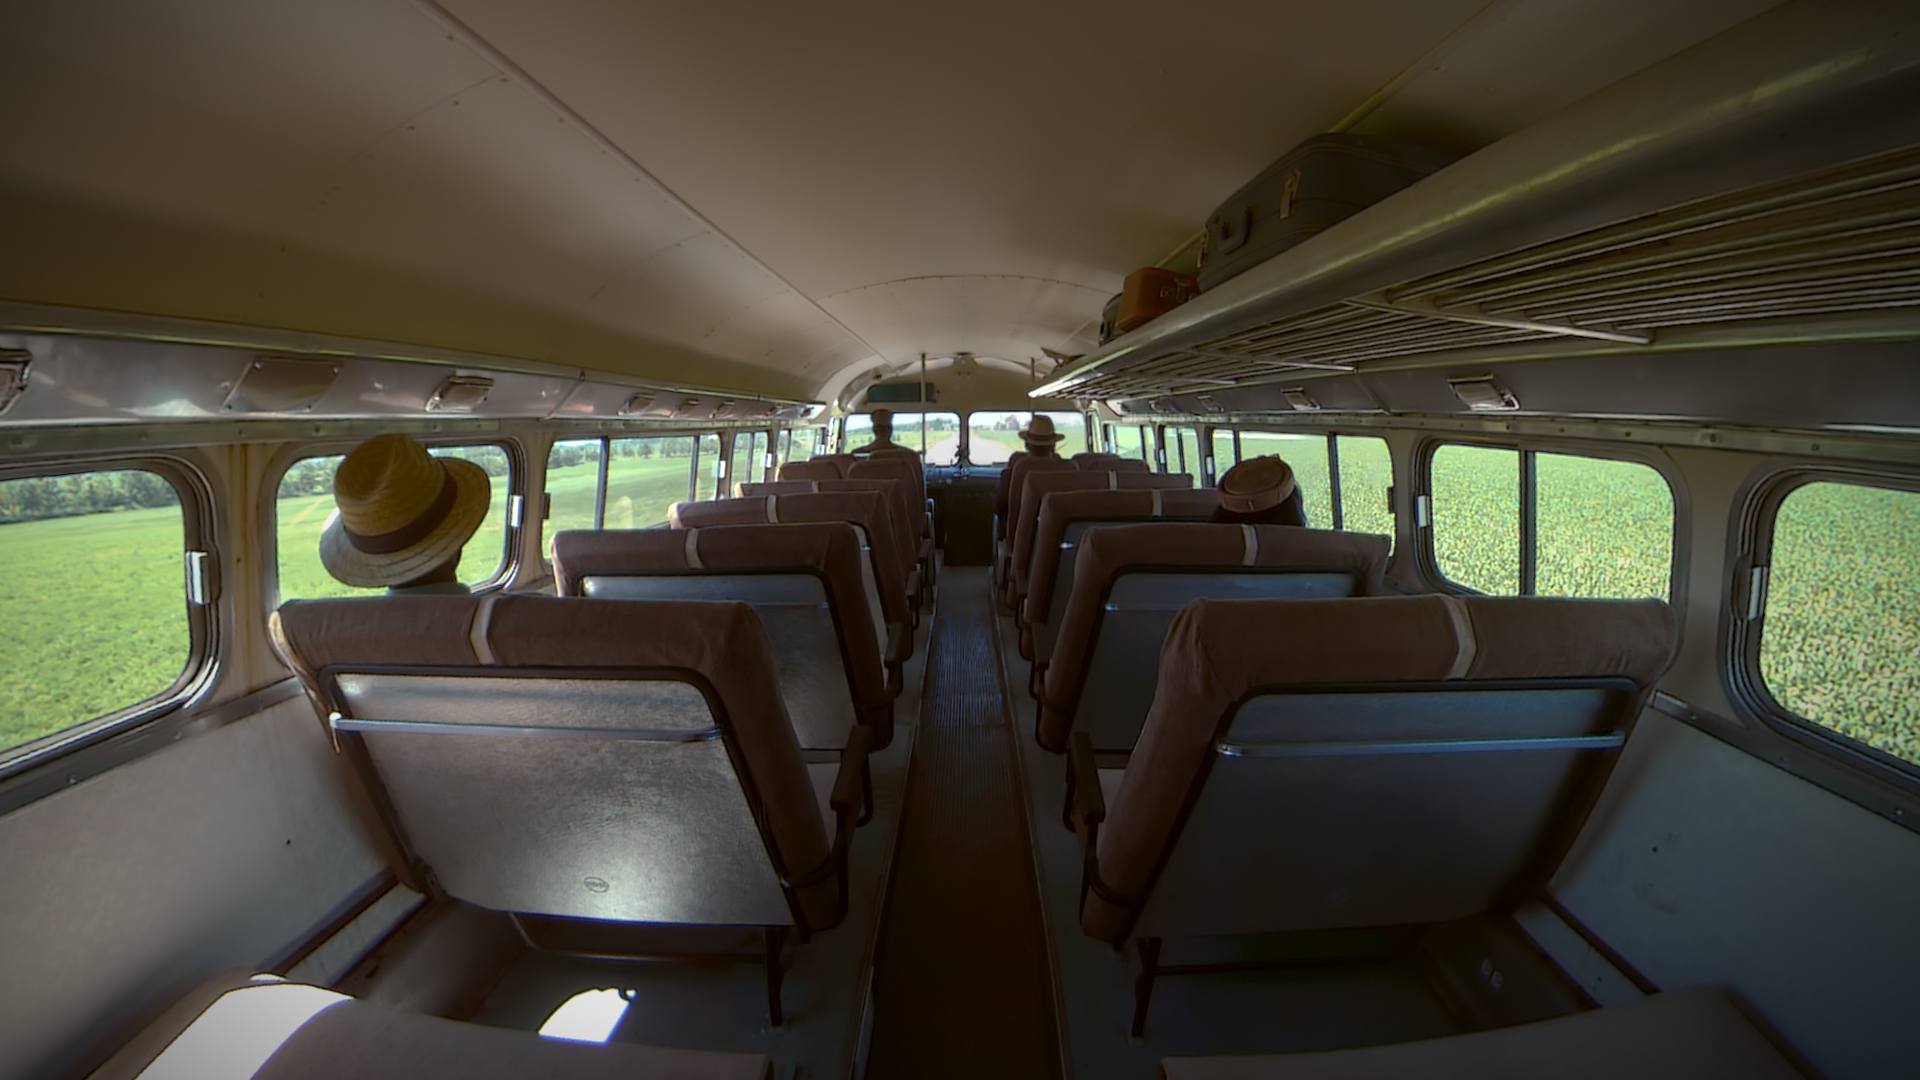 a fisheye point of view image from the perspective of a person sitting in a vintage bus, driving down a dirt road